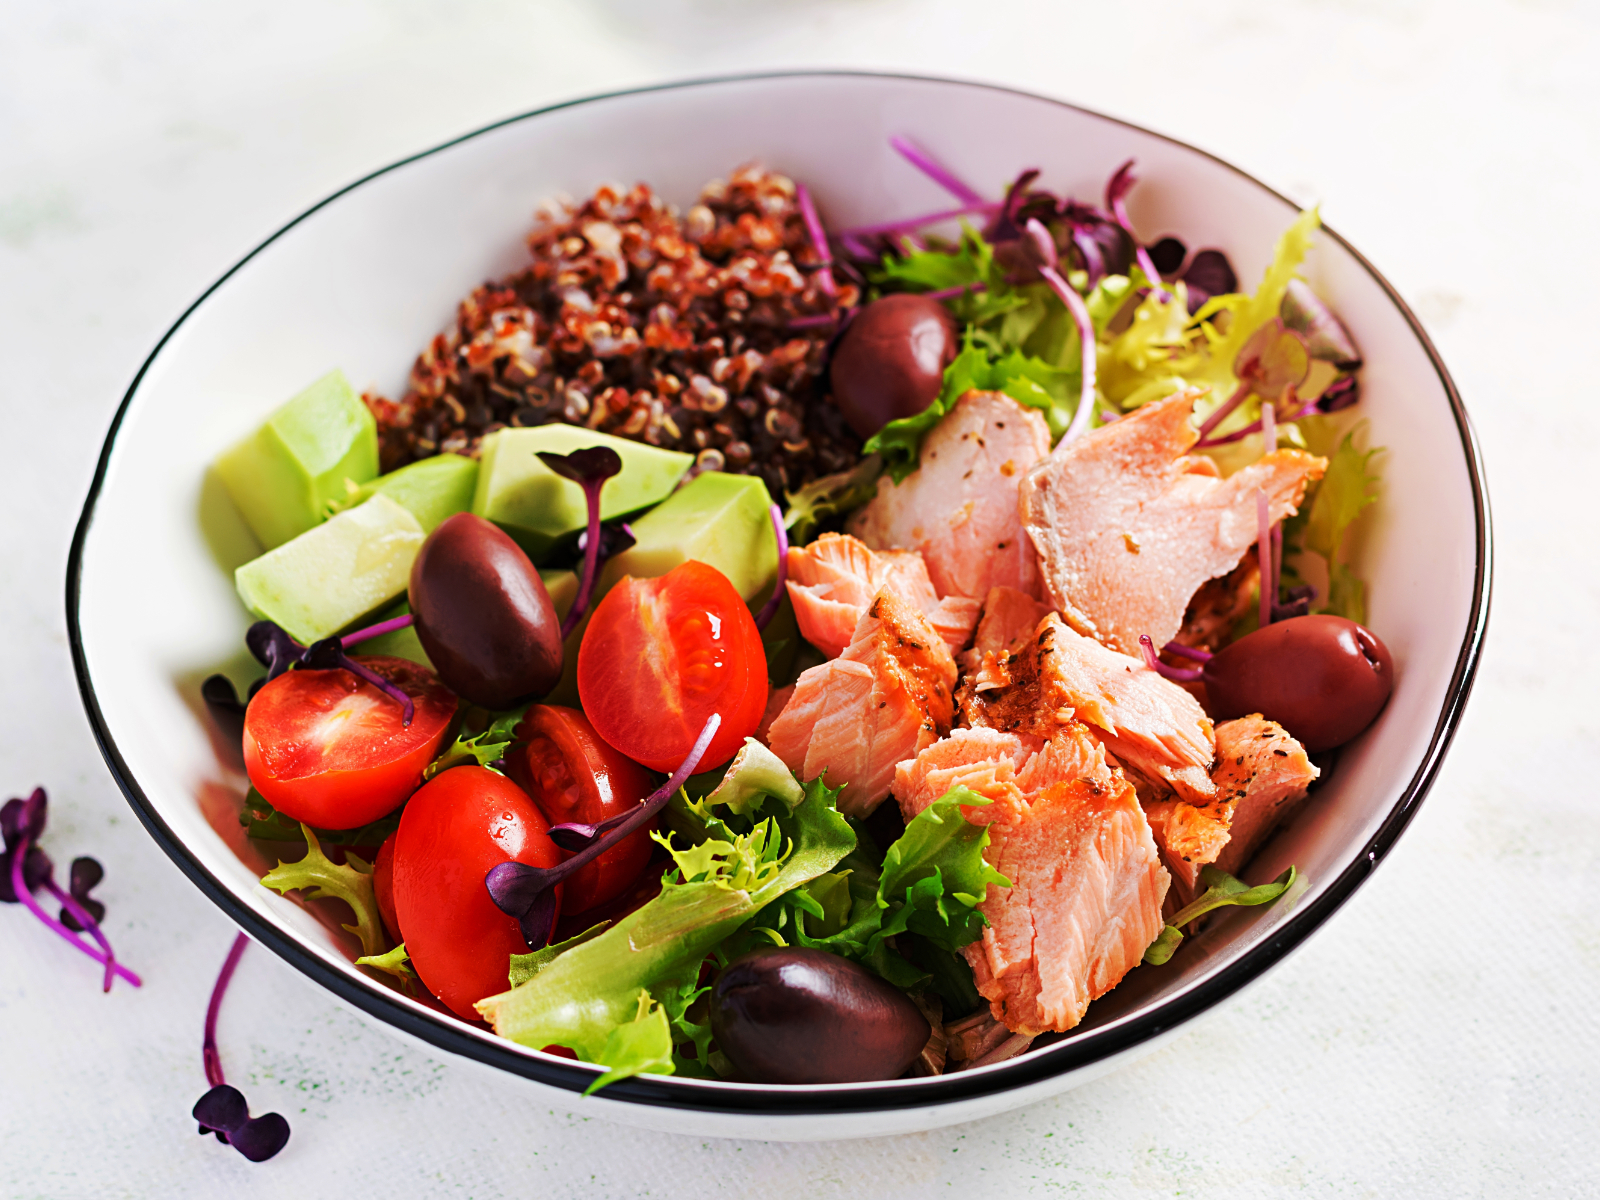 A mixed green salad with grilled salmon, avocado, and cherry tomatoes